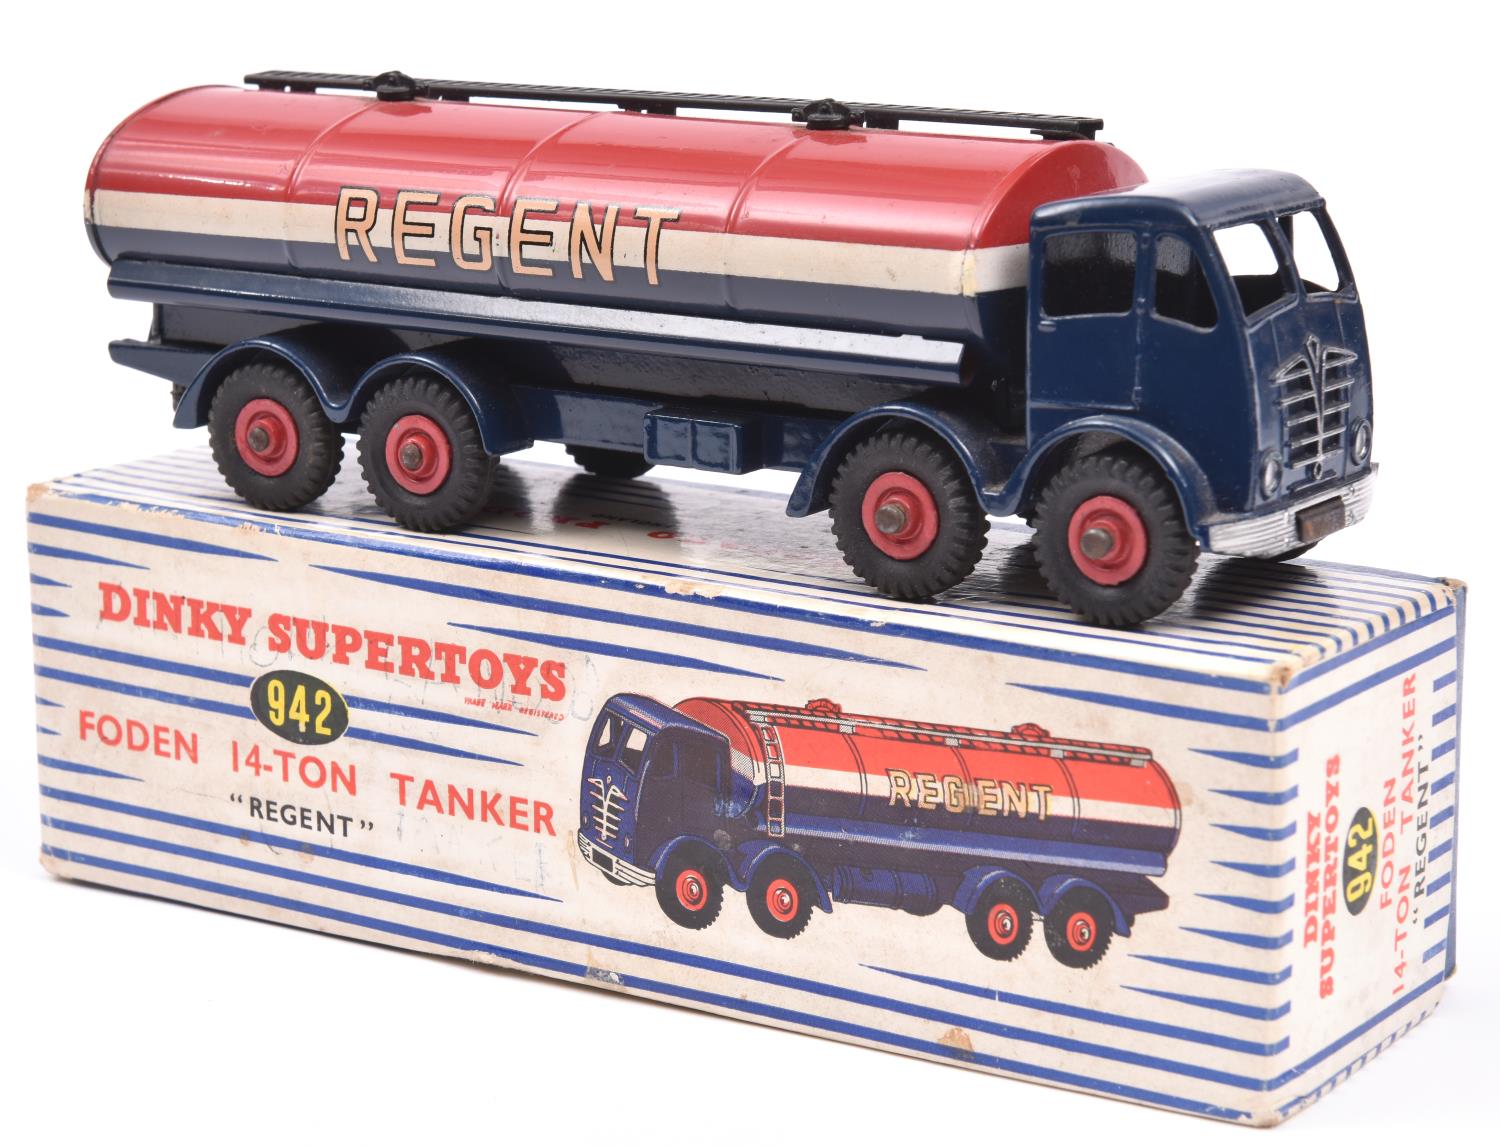 Dinky Supertoys Foden 14-Ton Tanker REGENT (942). In dark blue, red and white livery, red wheels and